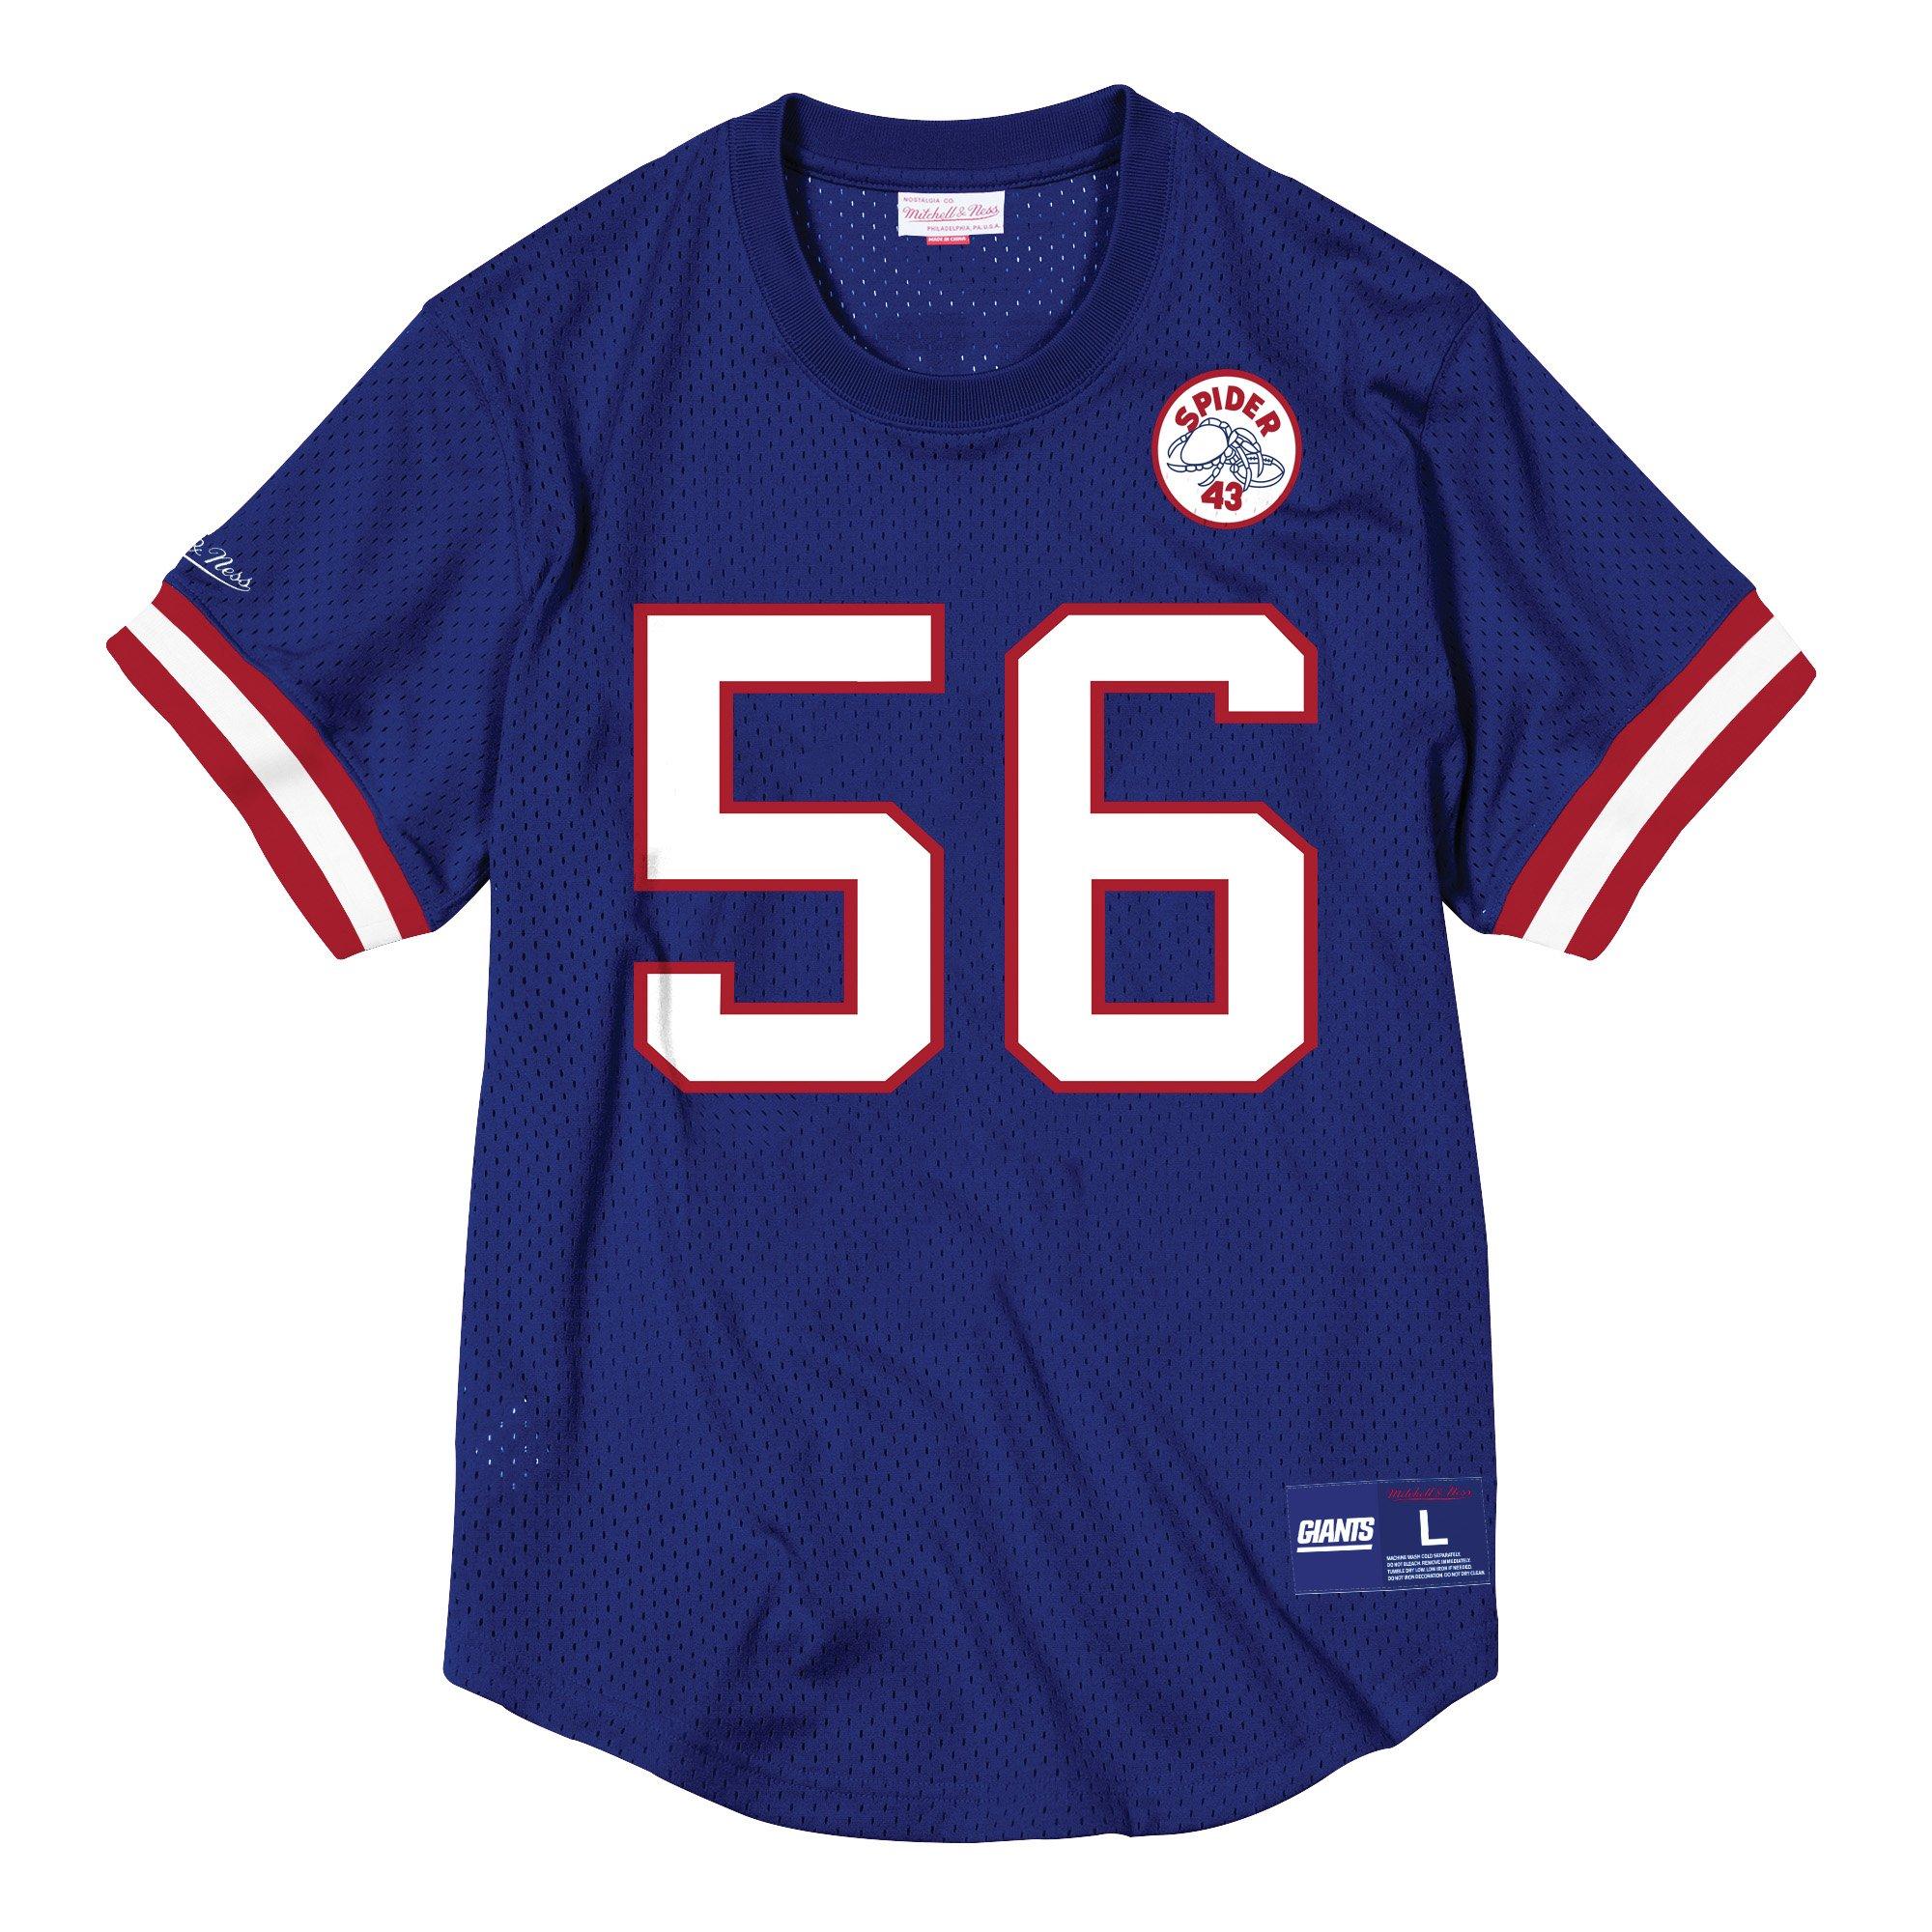 lawrence taylor jersey number